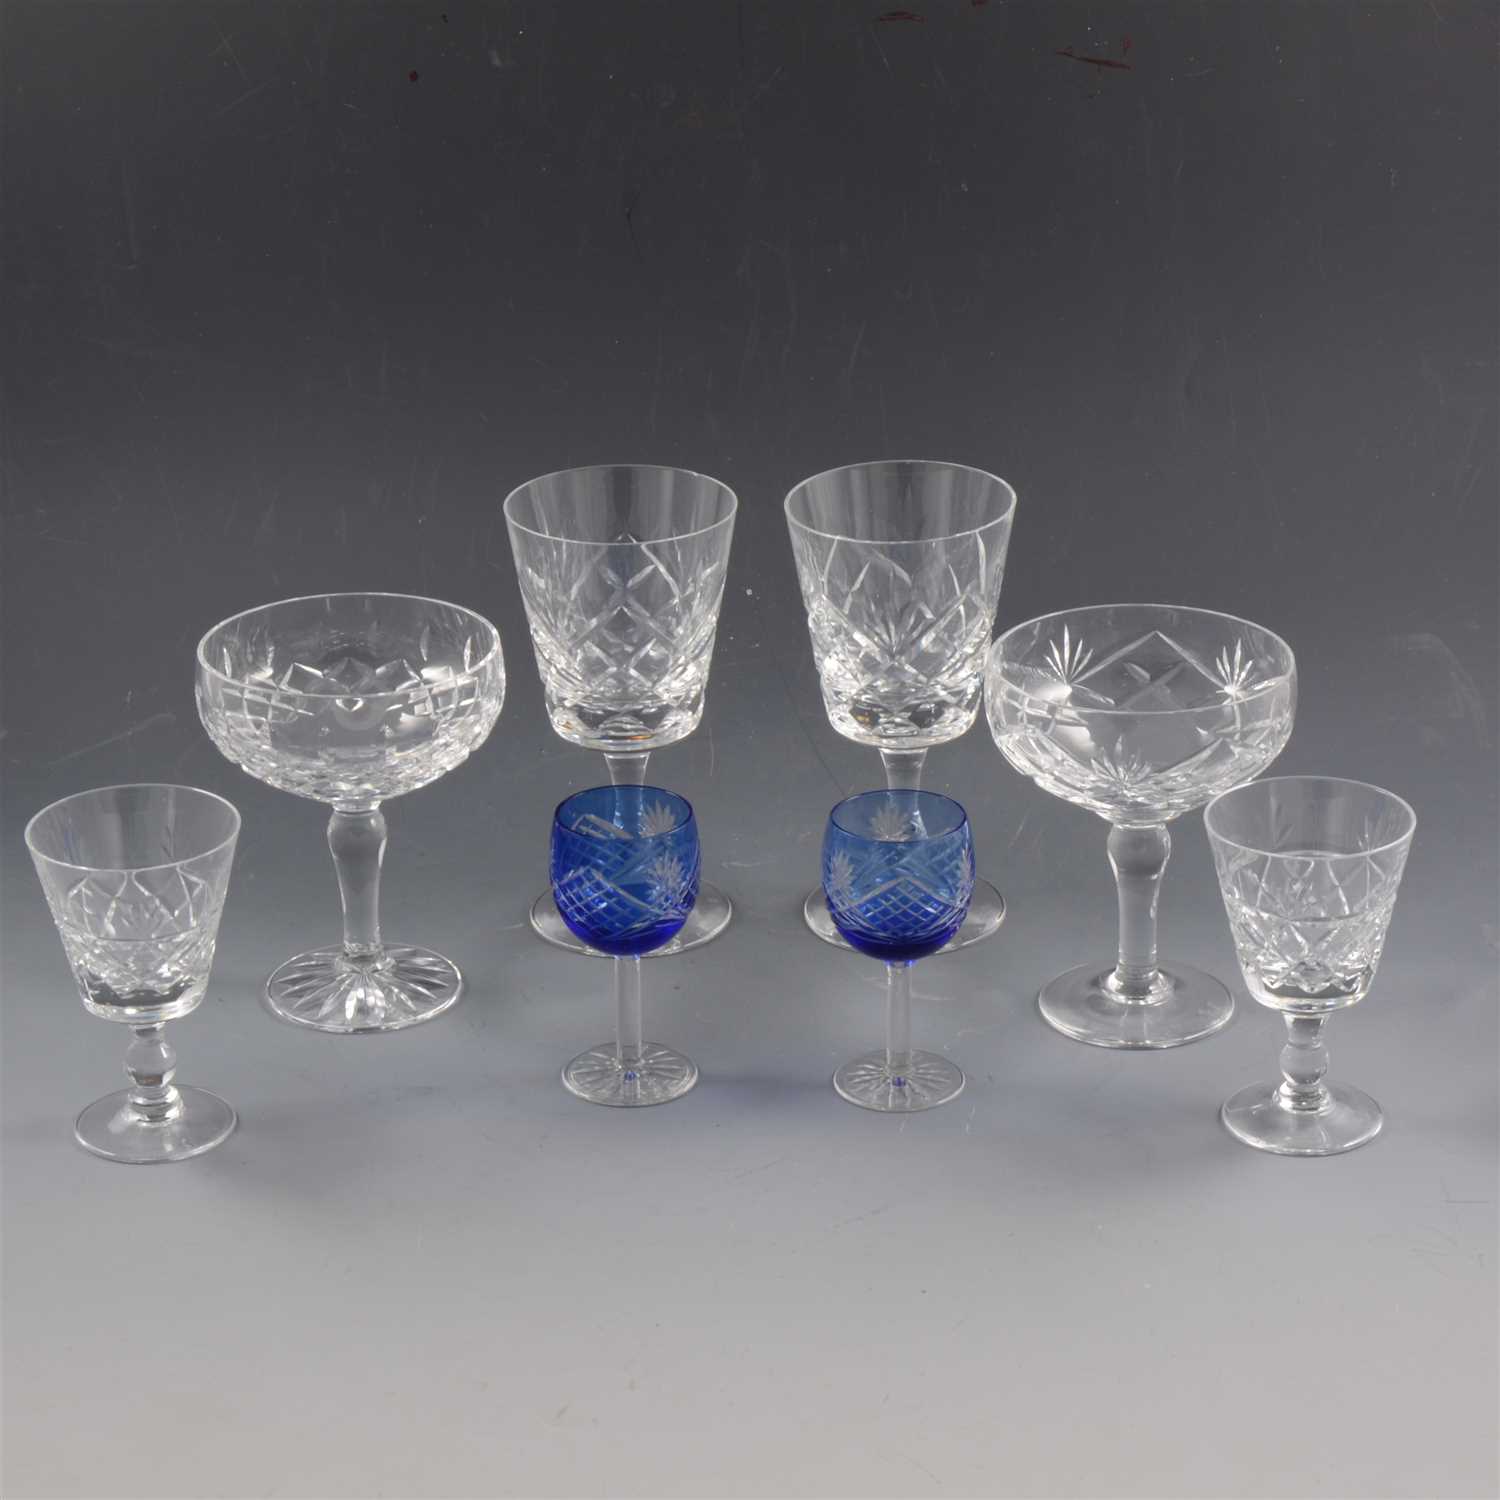 Lot 48 - Quantity of assorted crystal glassware, including Royal Brierley